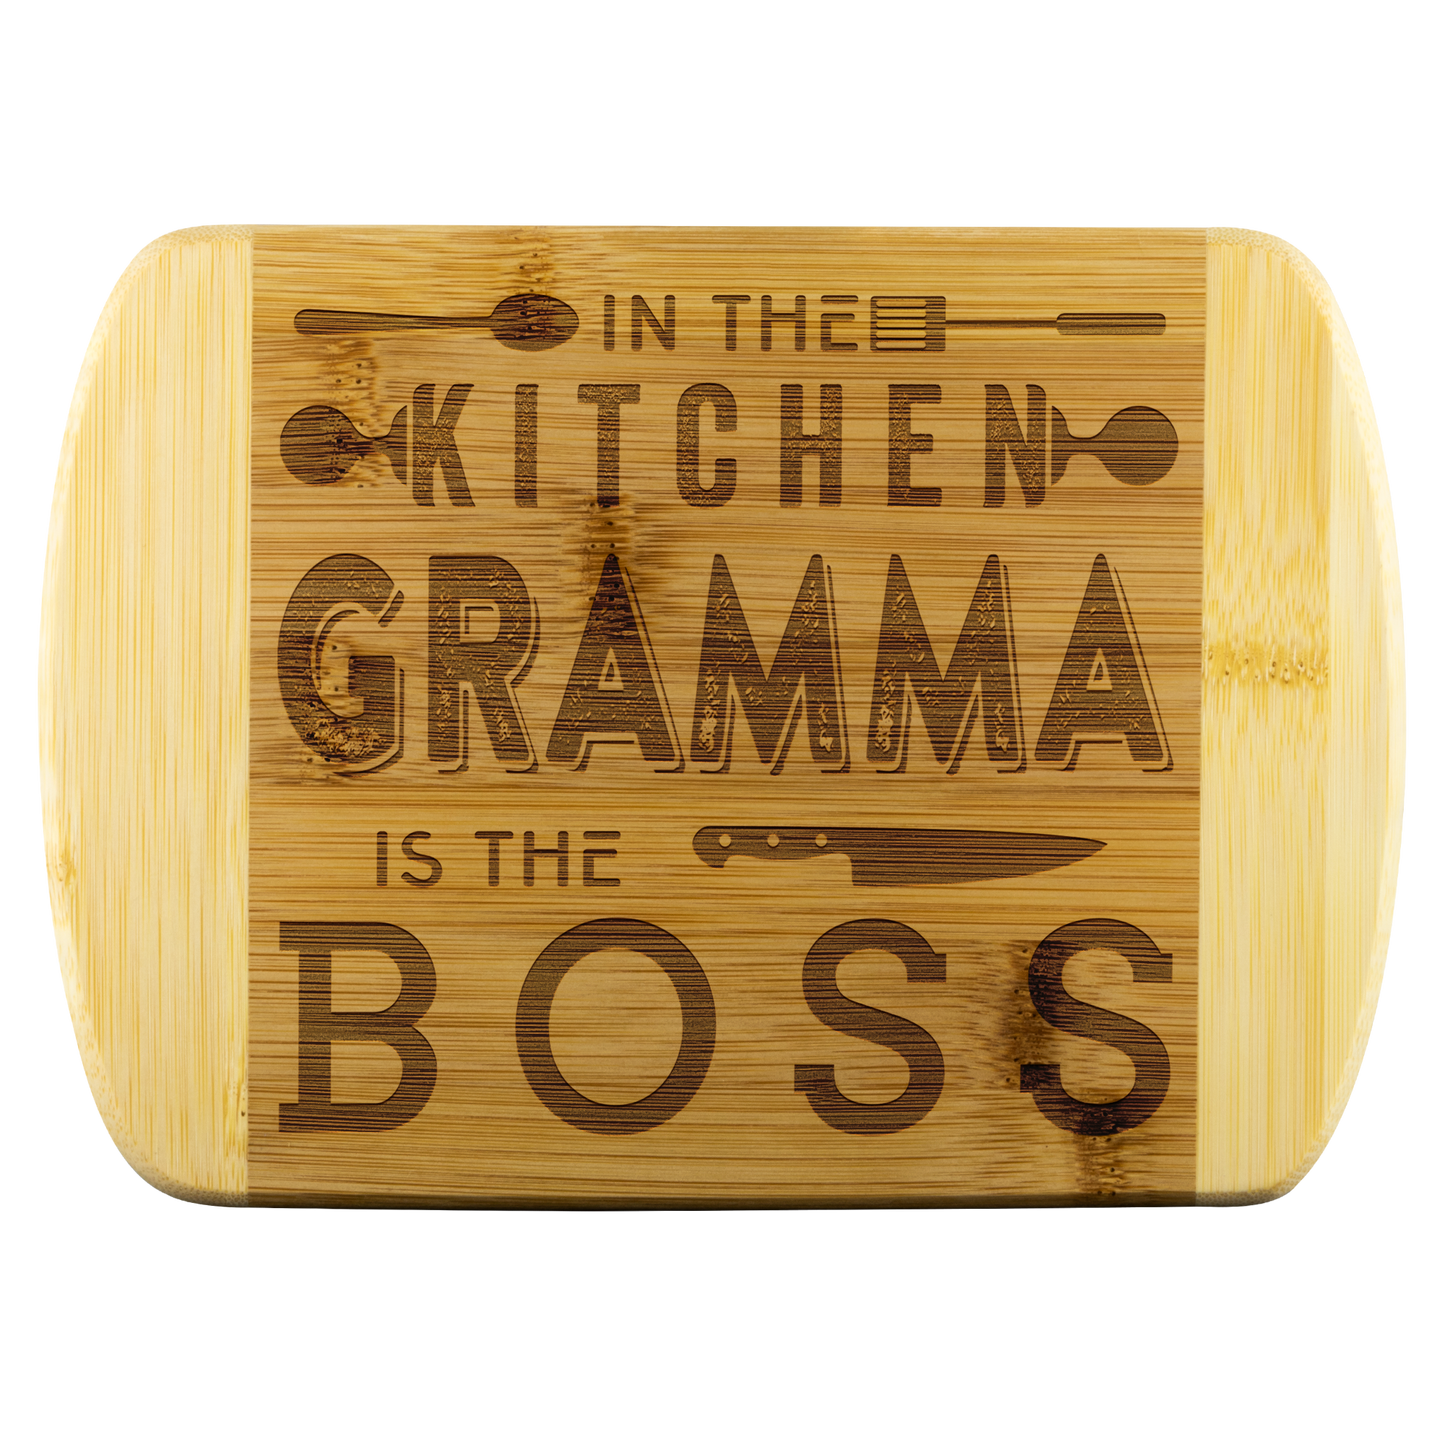 cub-20516371-sp-47326 - [ Gramma | 1 | 1 ] (TL_RoundEdgeWoodCuttingBoard) Mothers Day Gifts For Wife - In The Kitchen Gramma Is The Bo